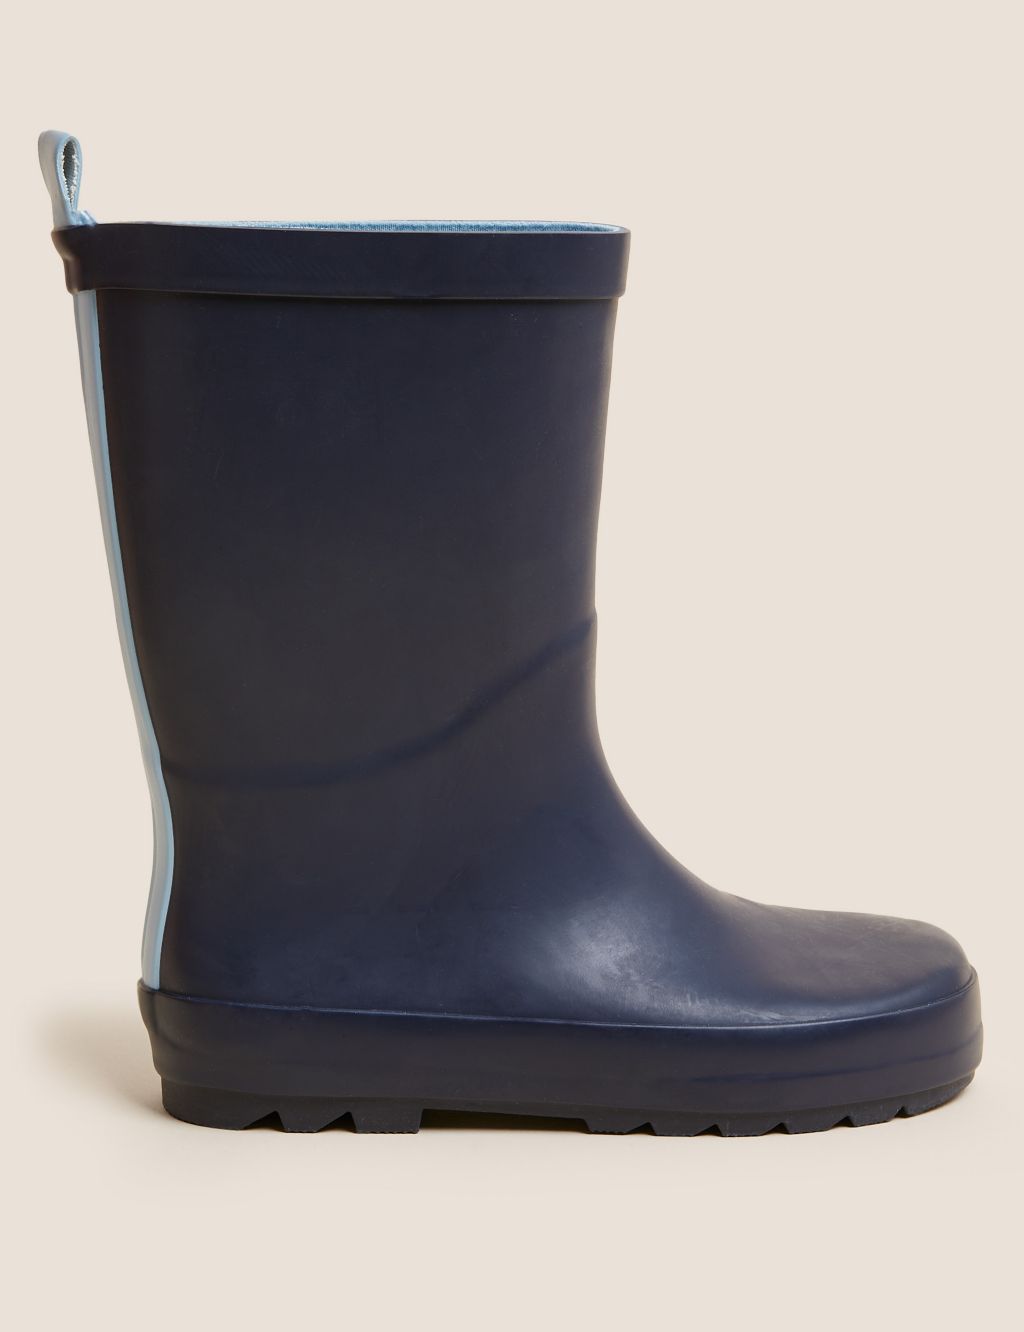 Kids' Plain Welly Boots (3 Small - 2 Large) image 1